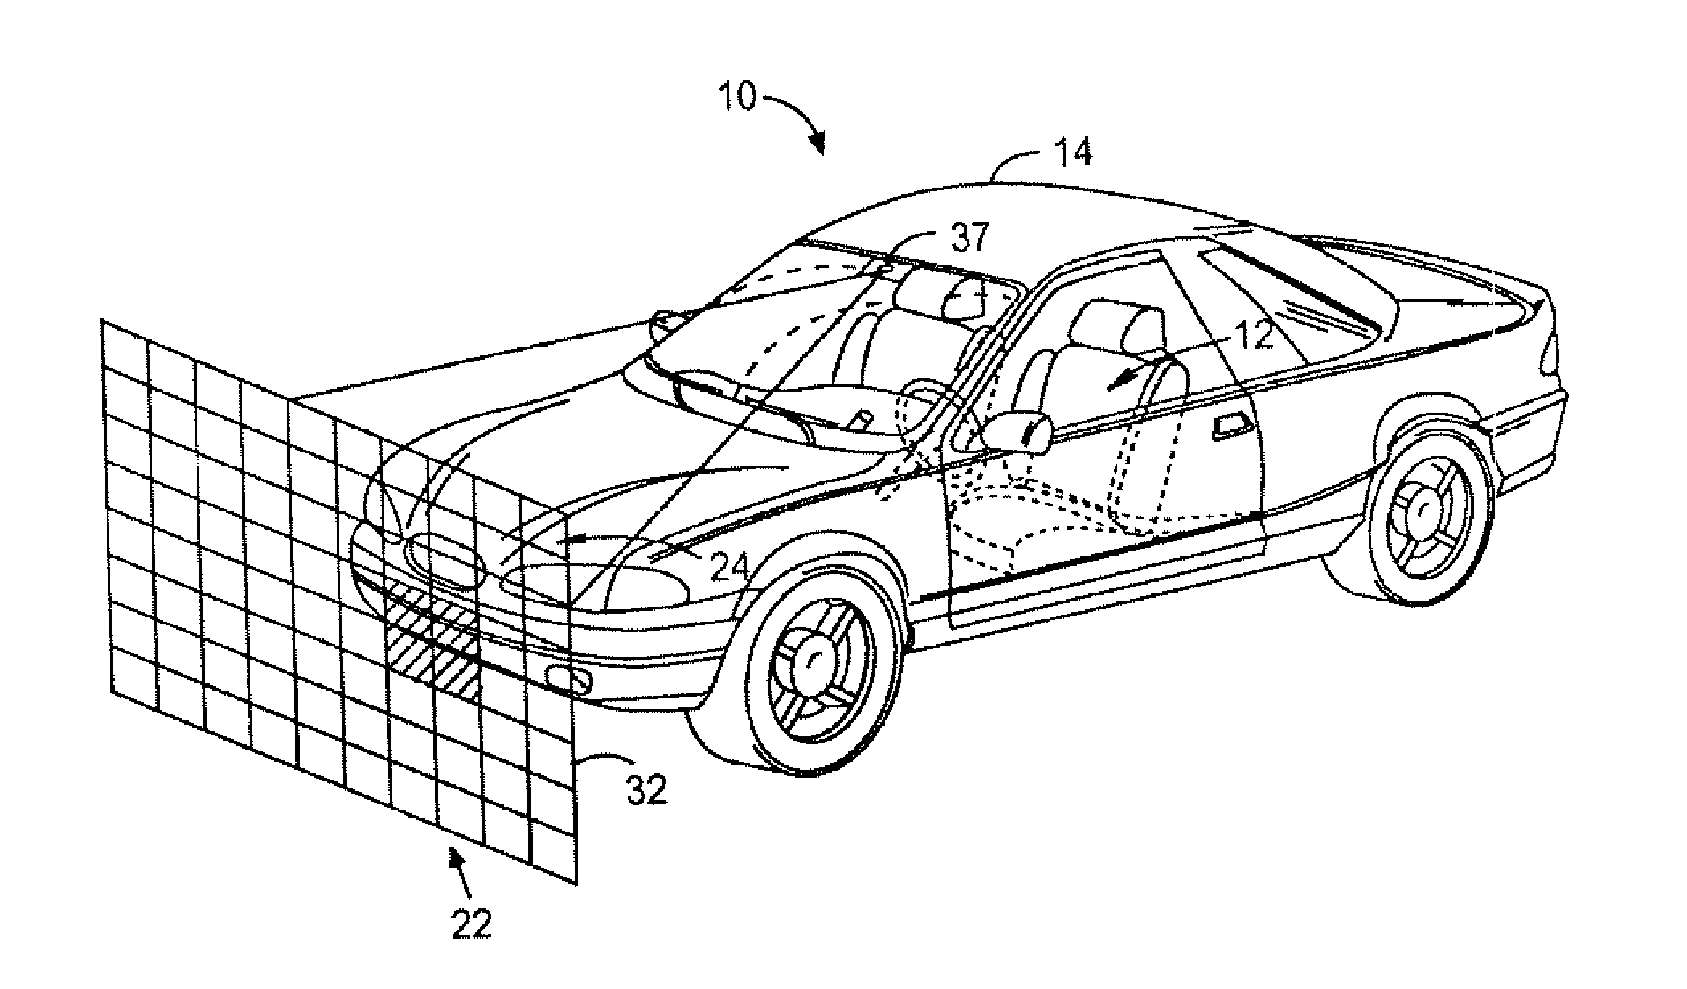 Anti-blinding system for a vehicle